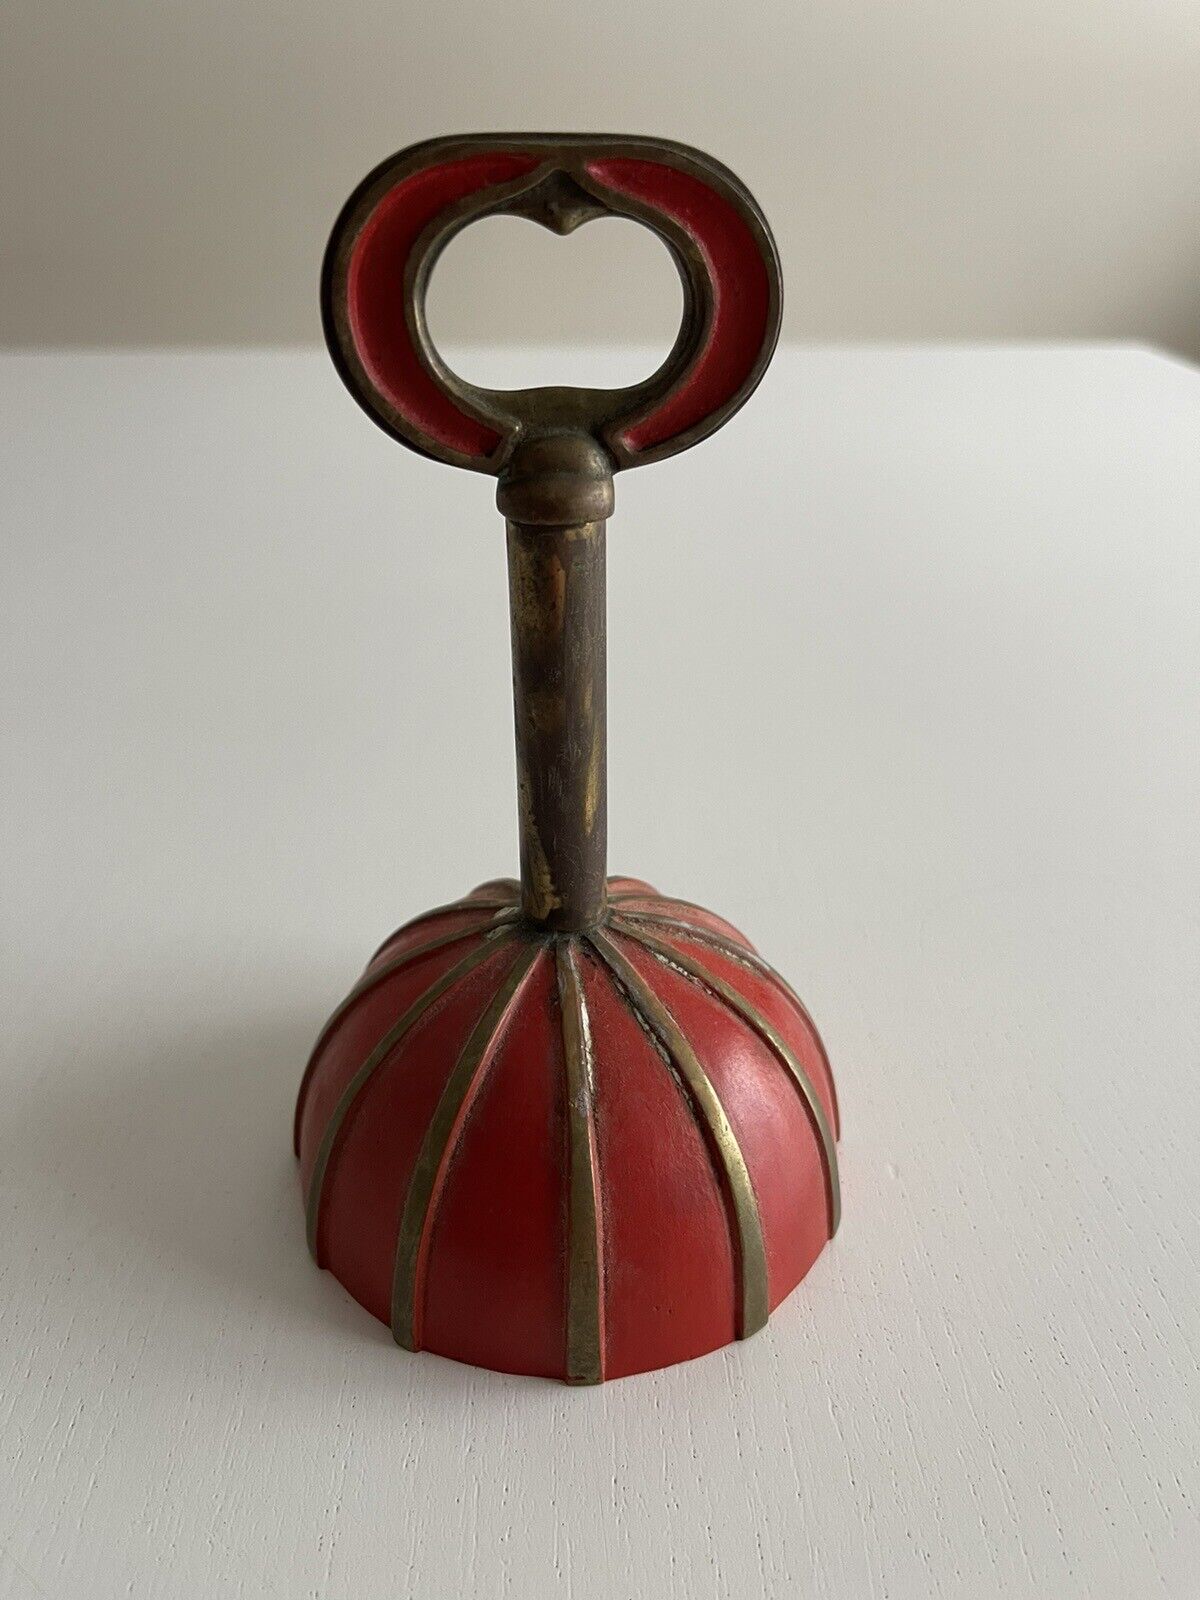 German handbell Painted from Munich Germany 3.3” Diameter and 5.3” In Length